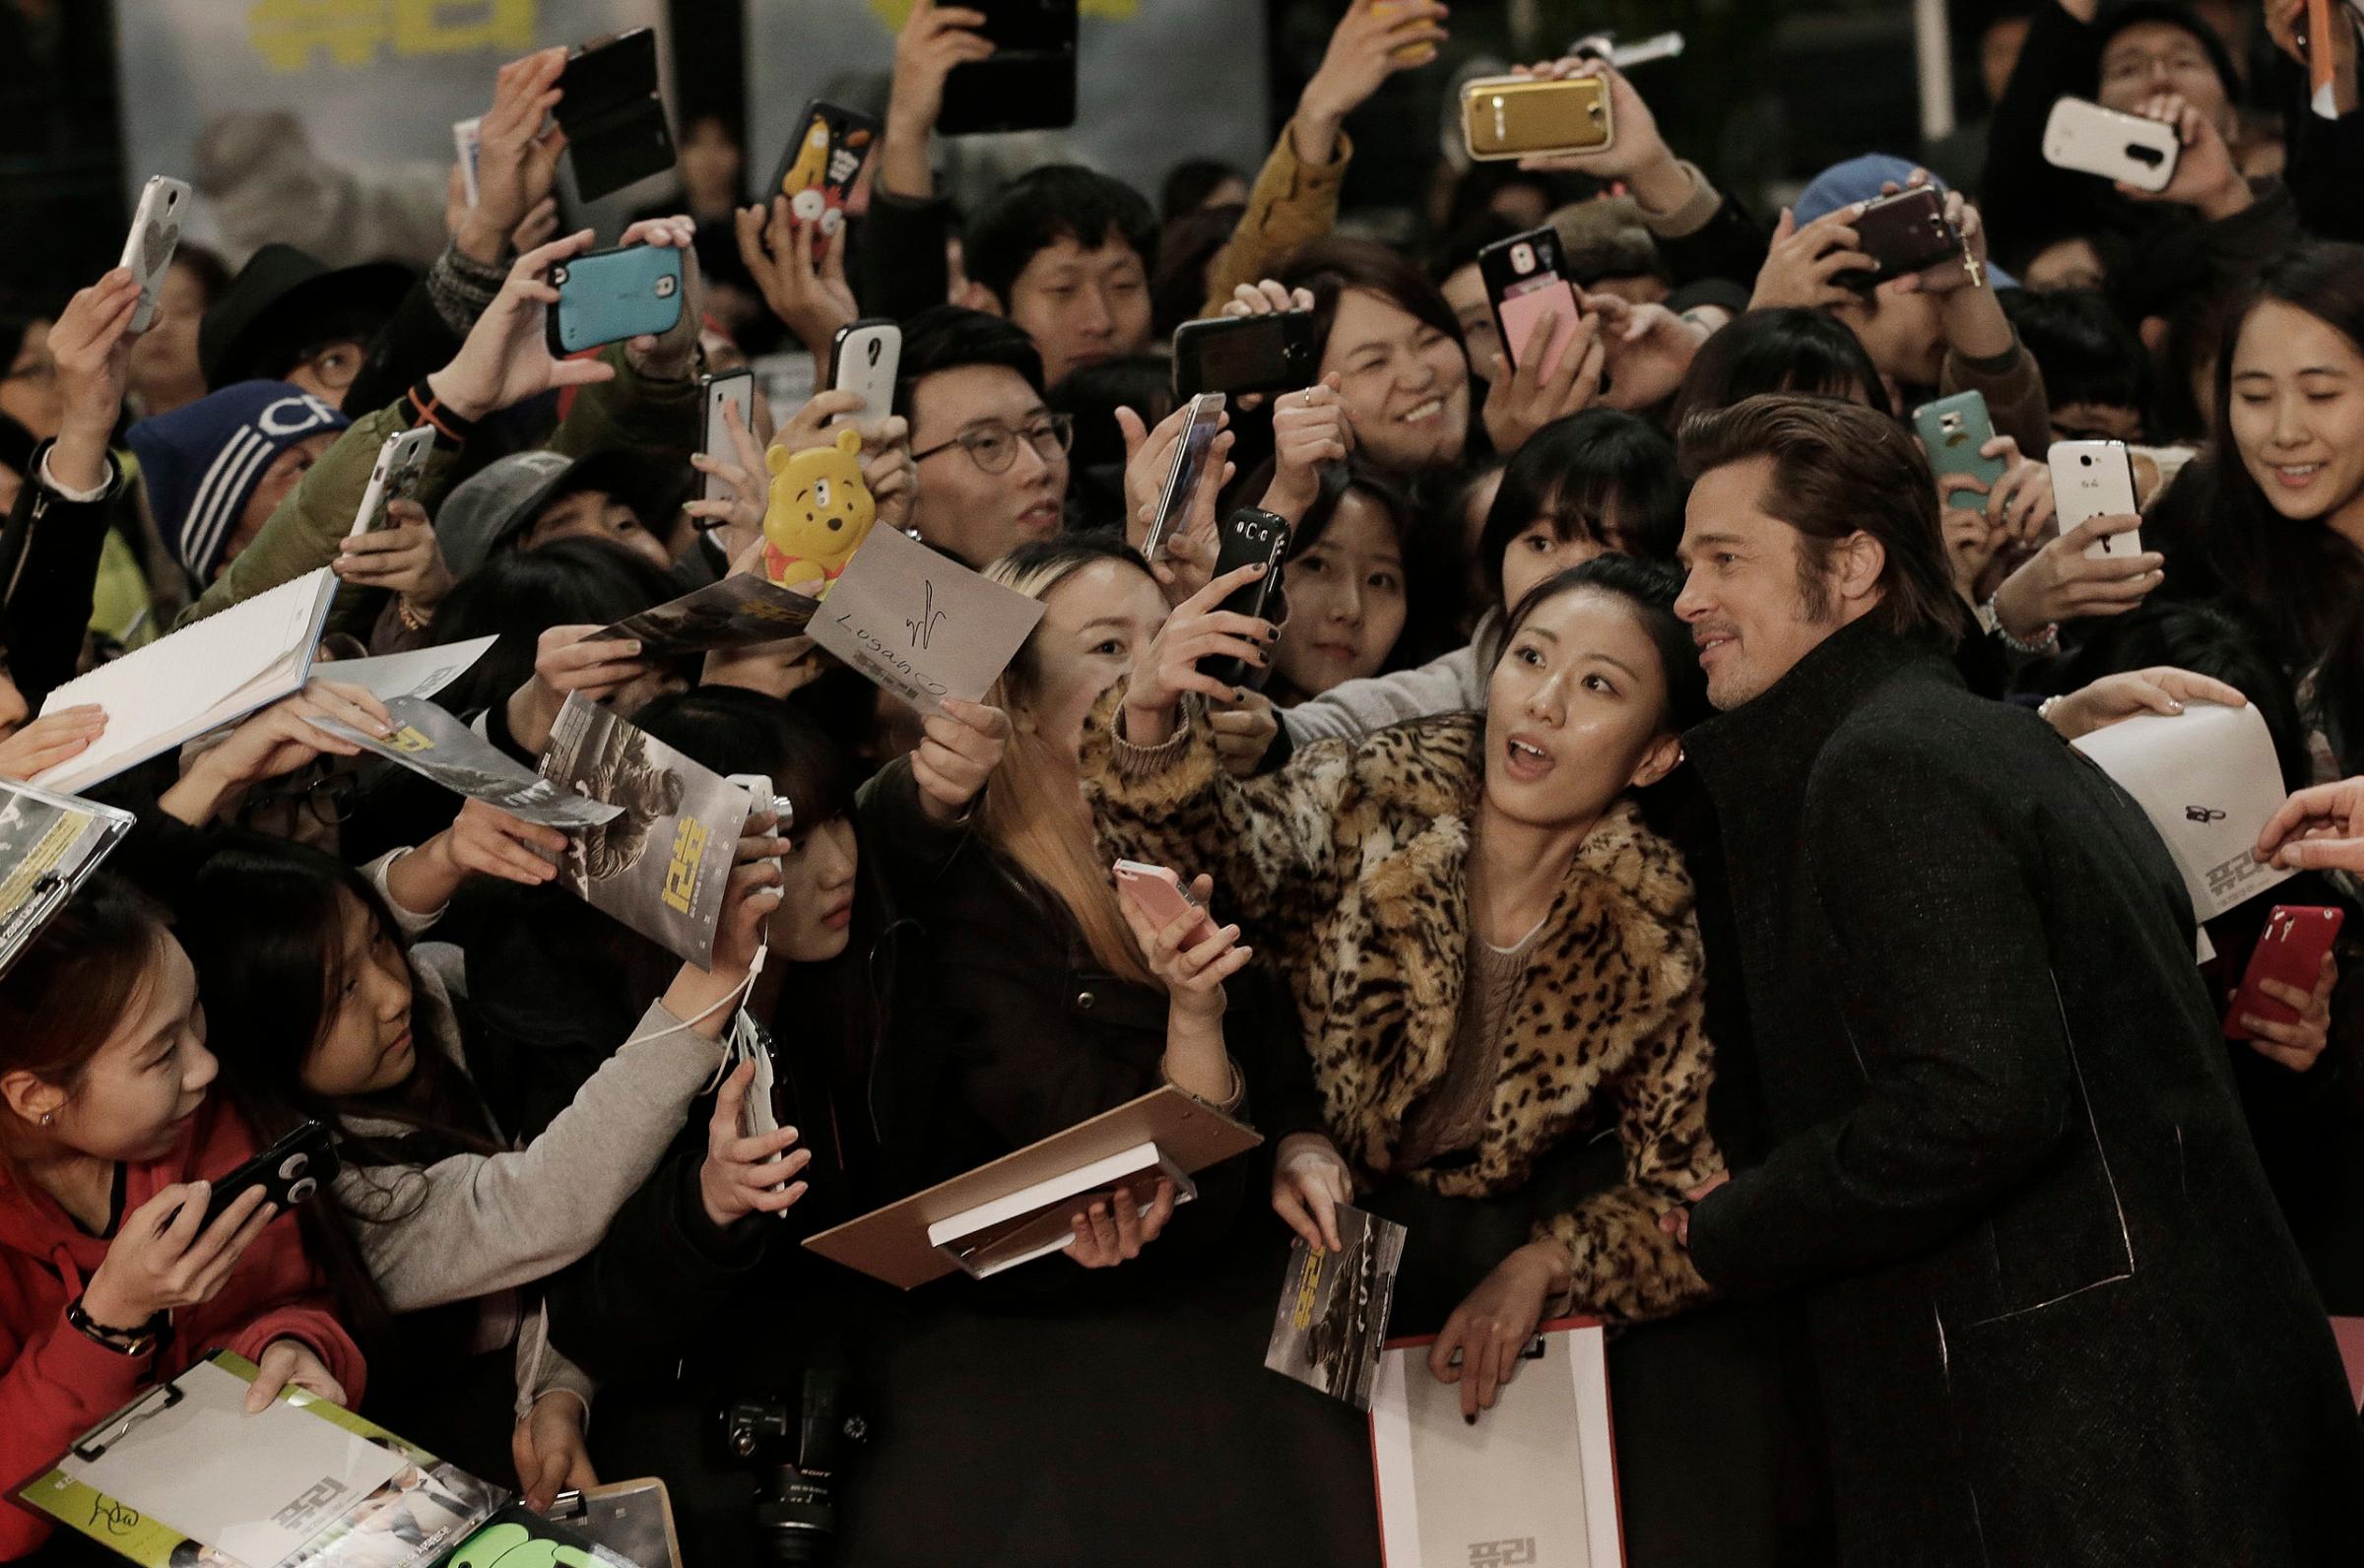 Actor Brad Pitt takes pictures with fans during a promotional event for his latest film "Fury" in Seoul, Thursday, Nov. 13, 2014.